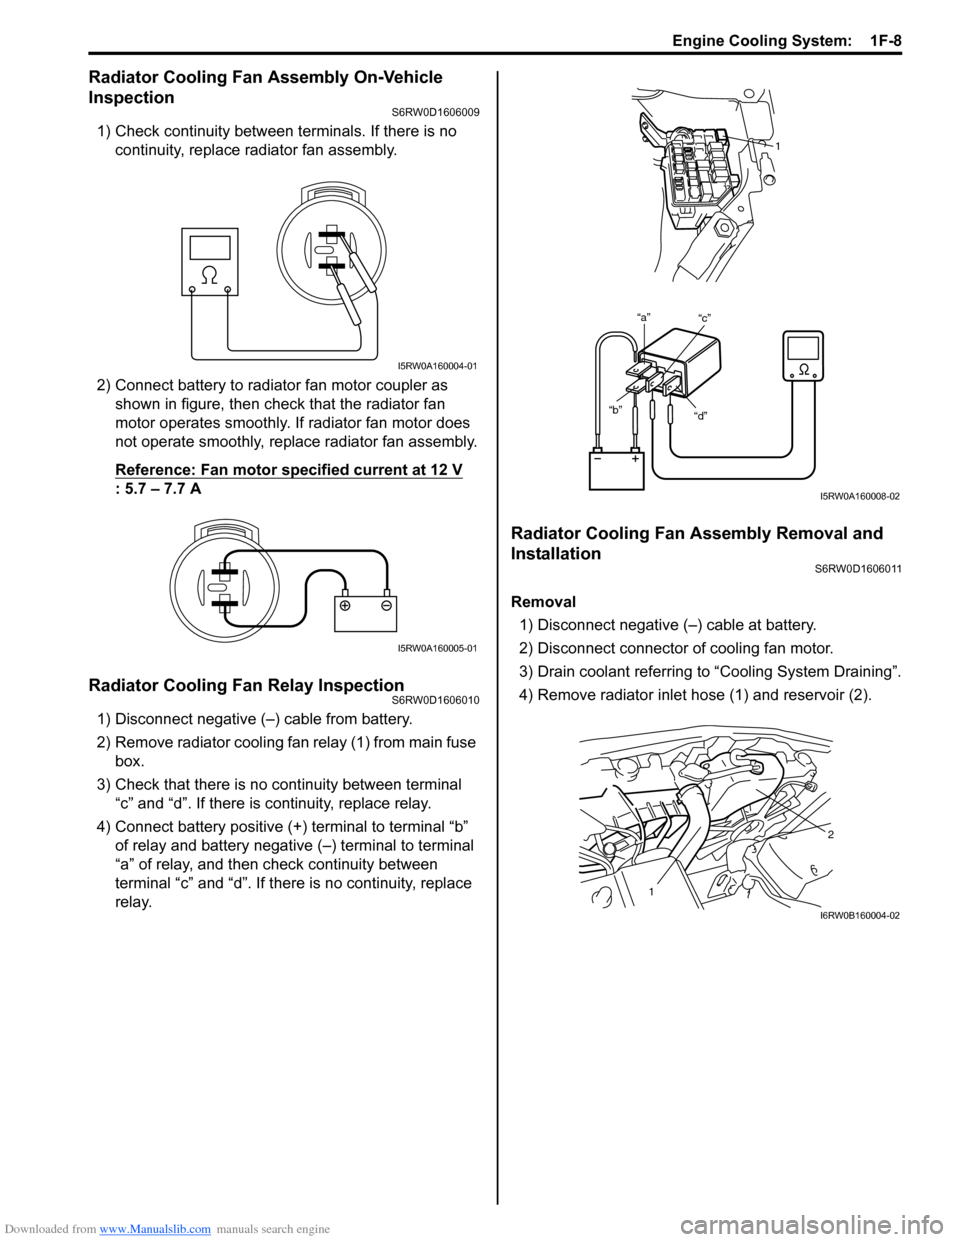 SUZUKI SX4 2006 1.G Service Workshop Manual Downloaded from www.Manualslib.com manuals search engine Engine Cooling System:  1F-8
Radiator Cooling Fan Assembly On-Vehicle 
Inspection
S6RW0D1606009
1) Check continuity between terminals. If there